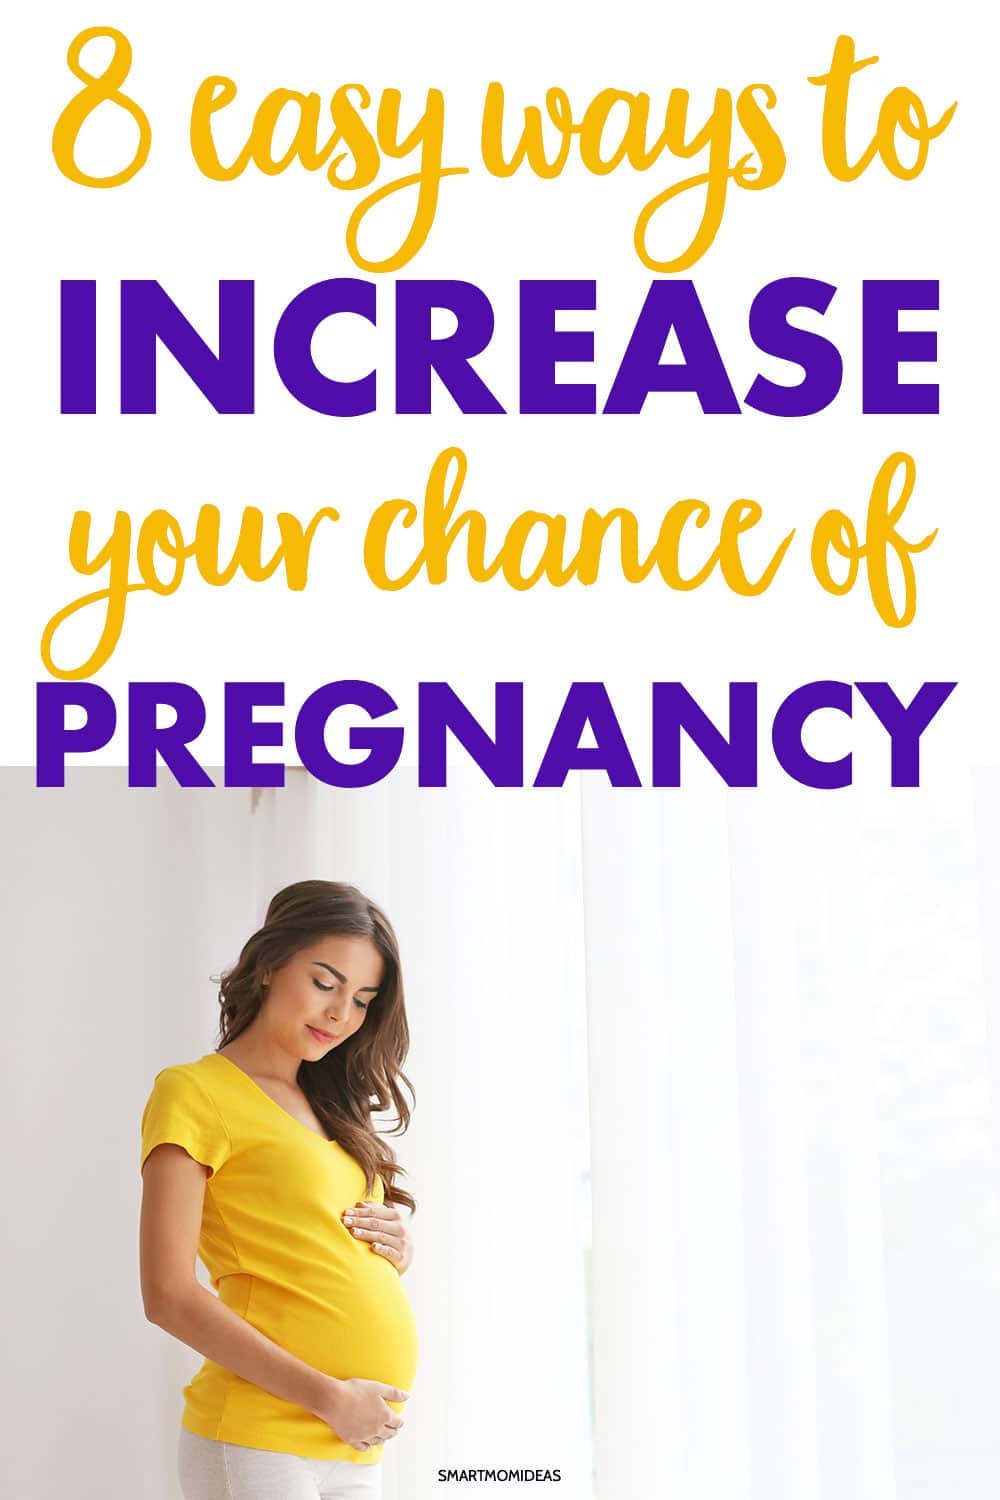 8 Ways on How to Increase the Chances of Getting Pregnant